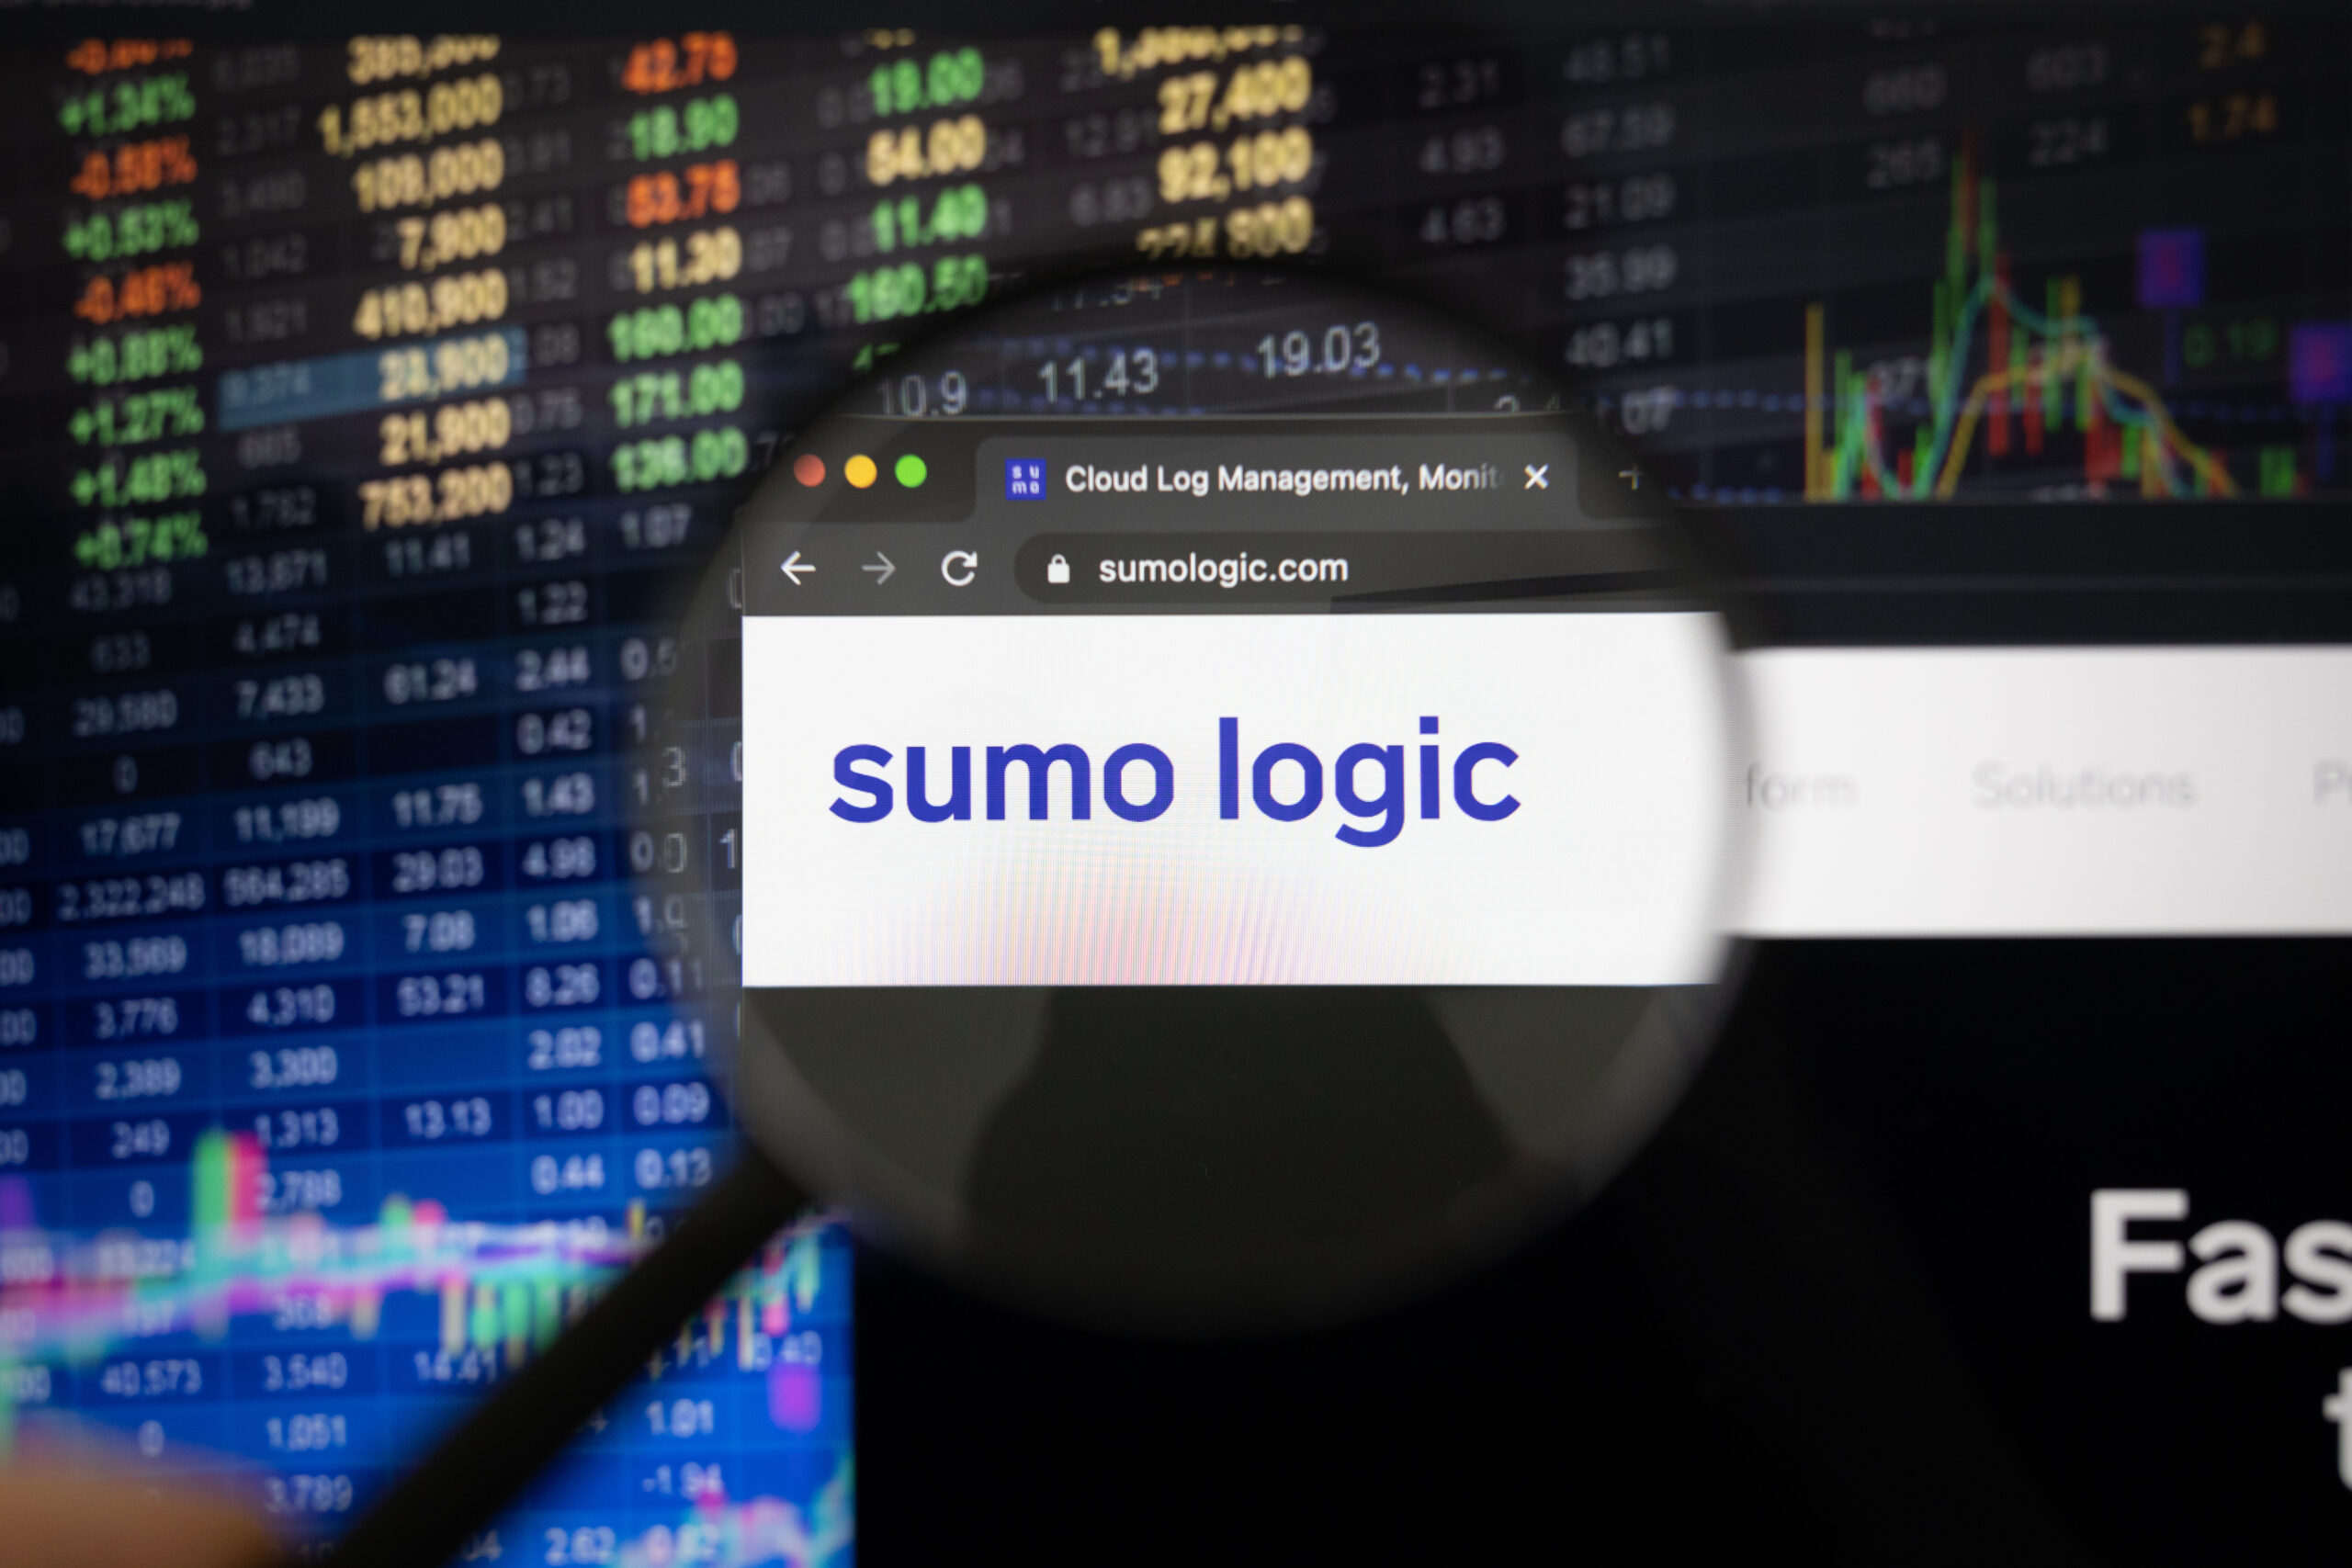 sumo-logic-urges-users-to-change-credentials-due-to-security-breach